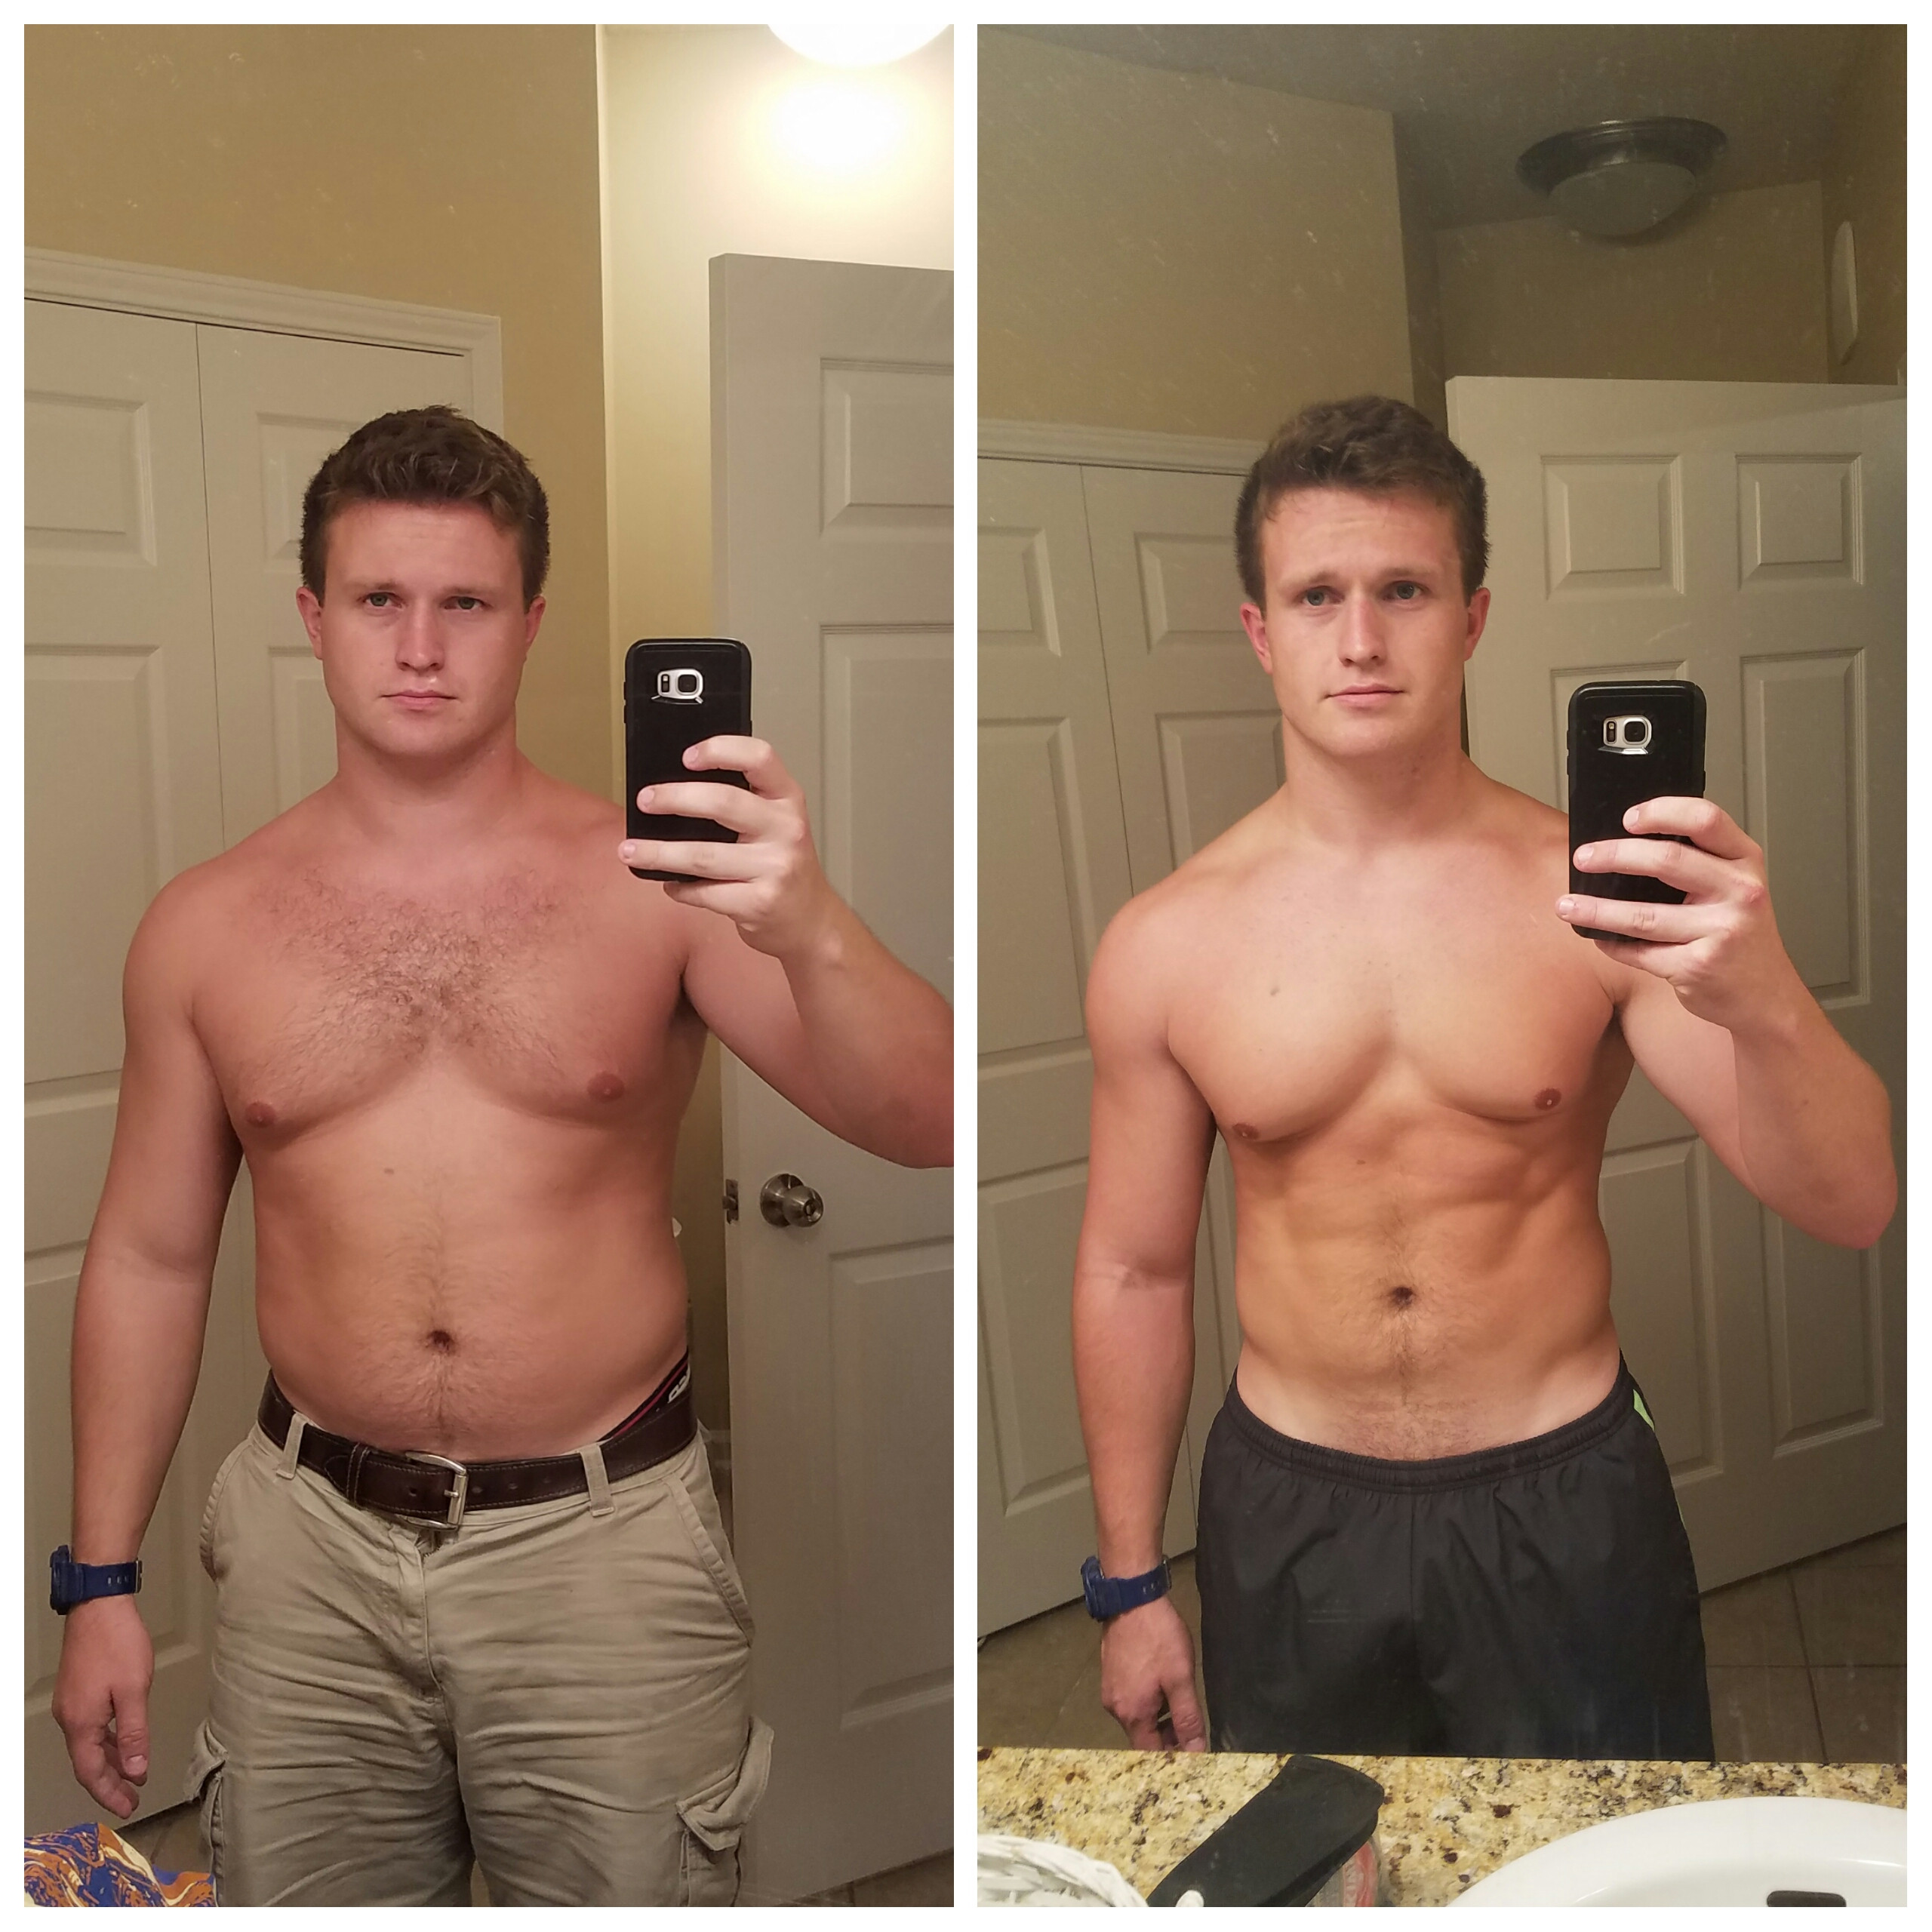 Keto Diet Before And After 3 Months
 [SV][Pics] Started at 220 pounds a month ago Weighed 199